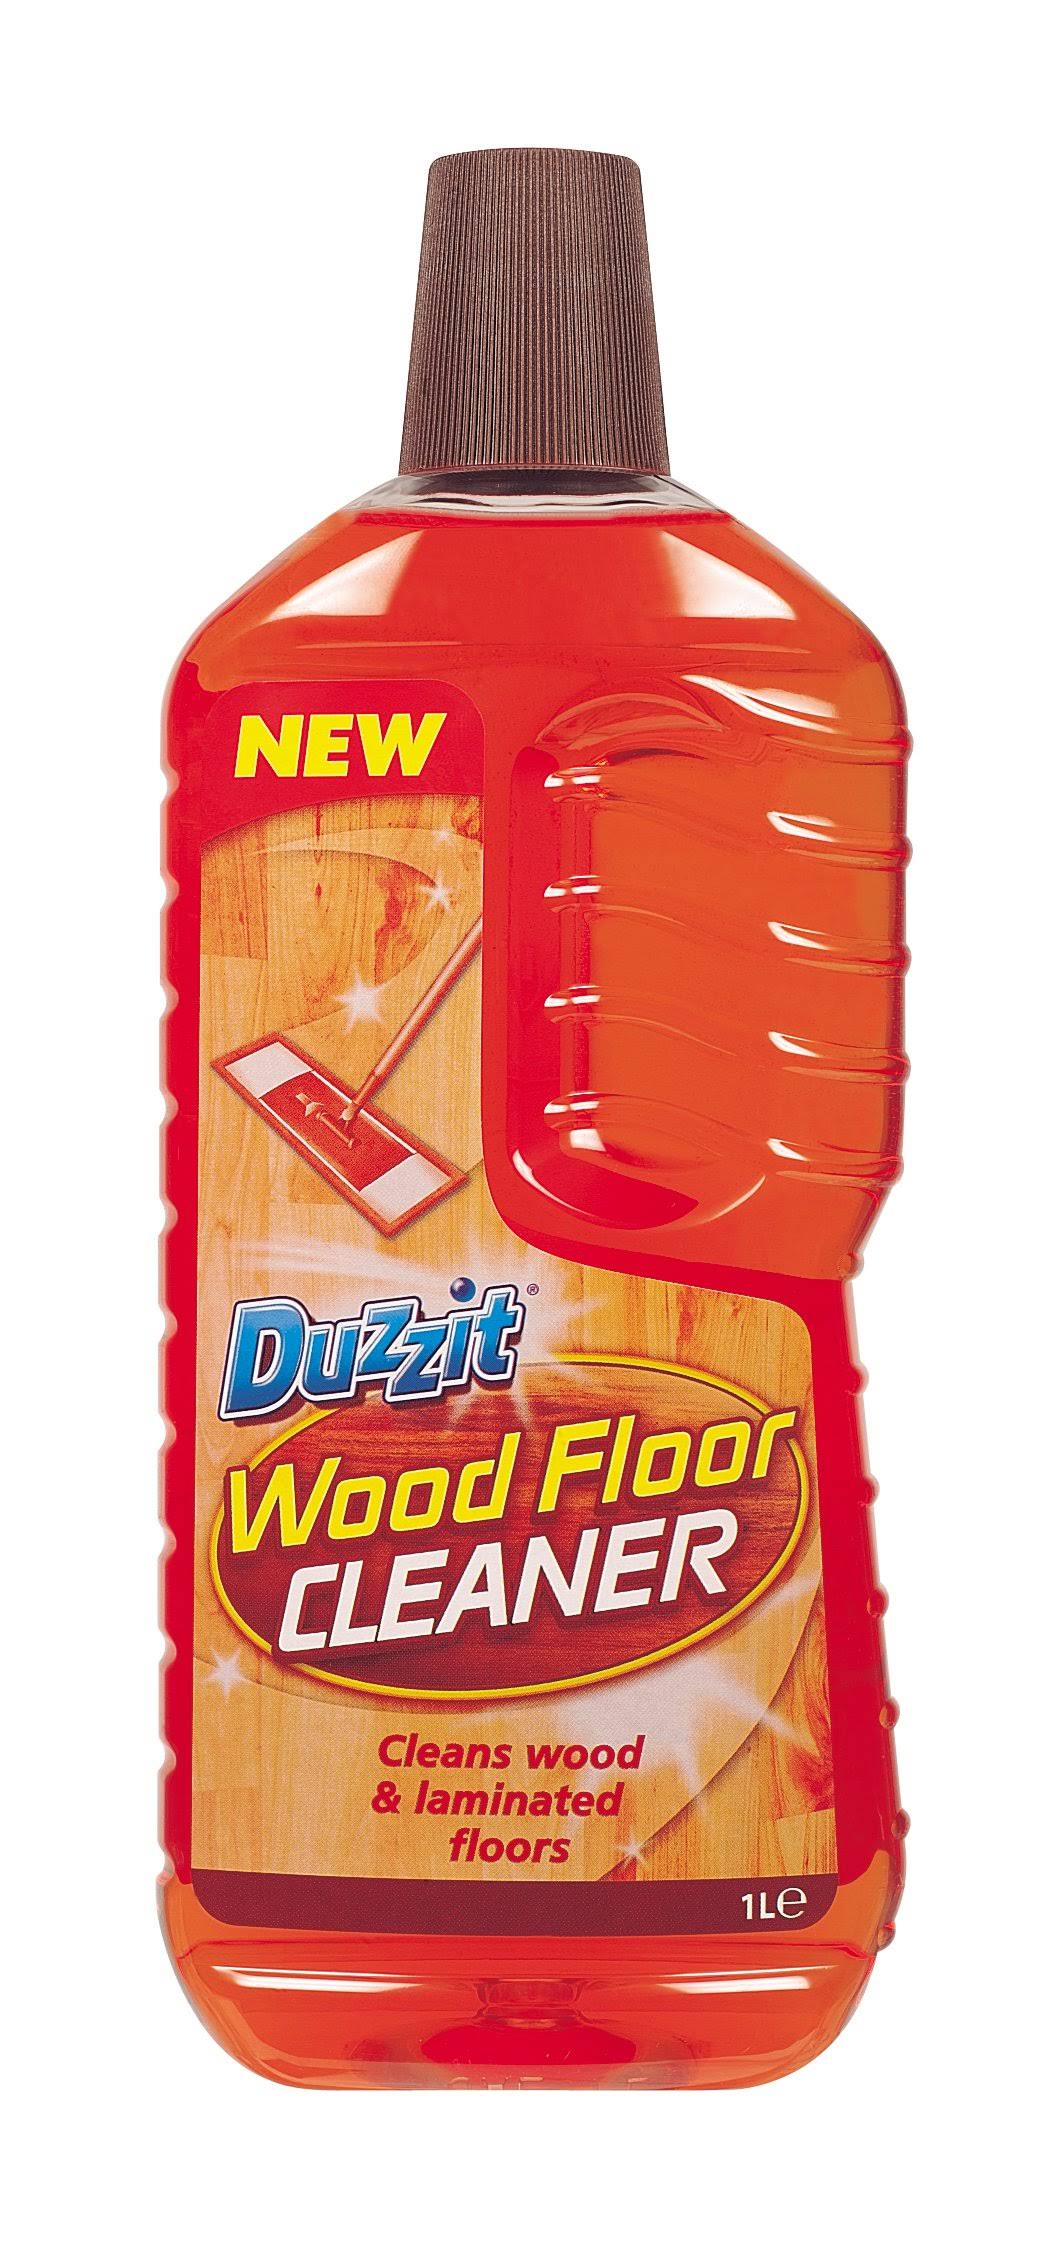 Duzzit Wood and Laminated Floor Cleaner - 1L